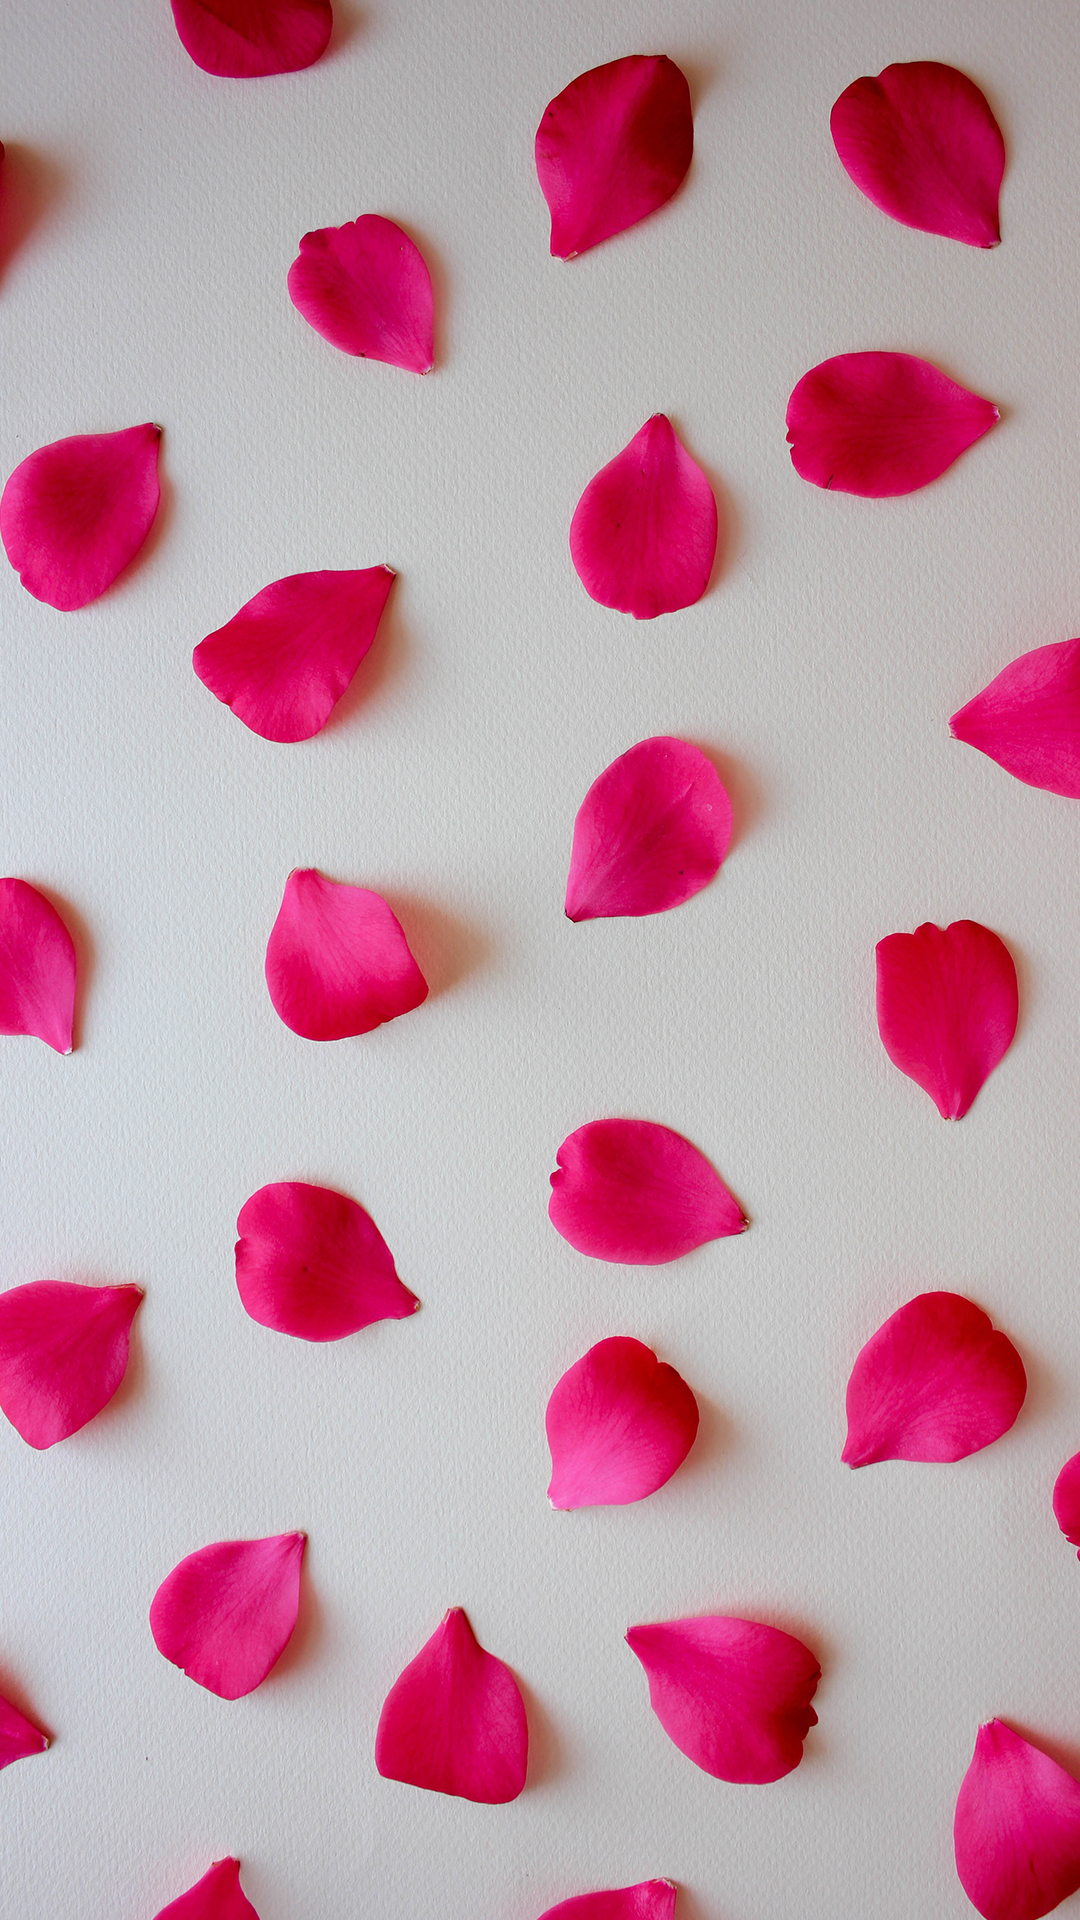 Rose Petals HD Wallpaper For Your Mobile Phone